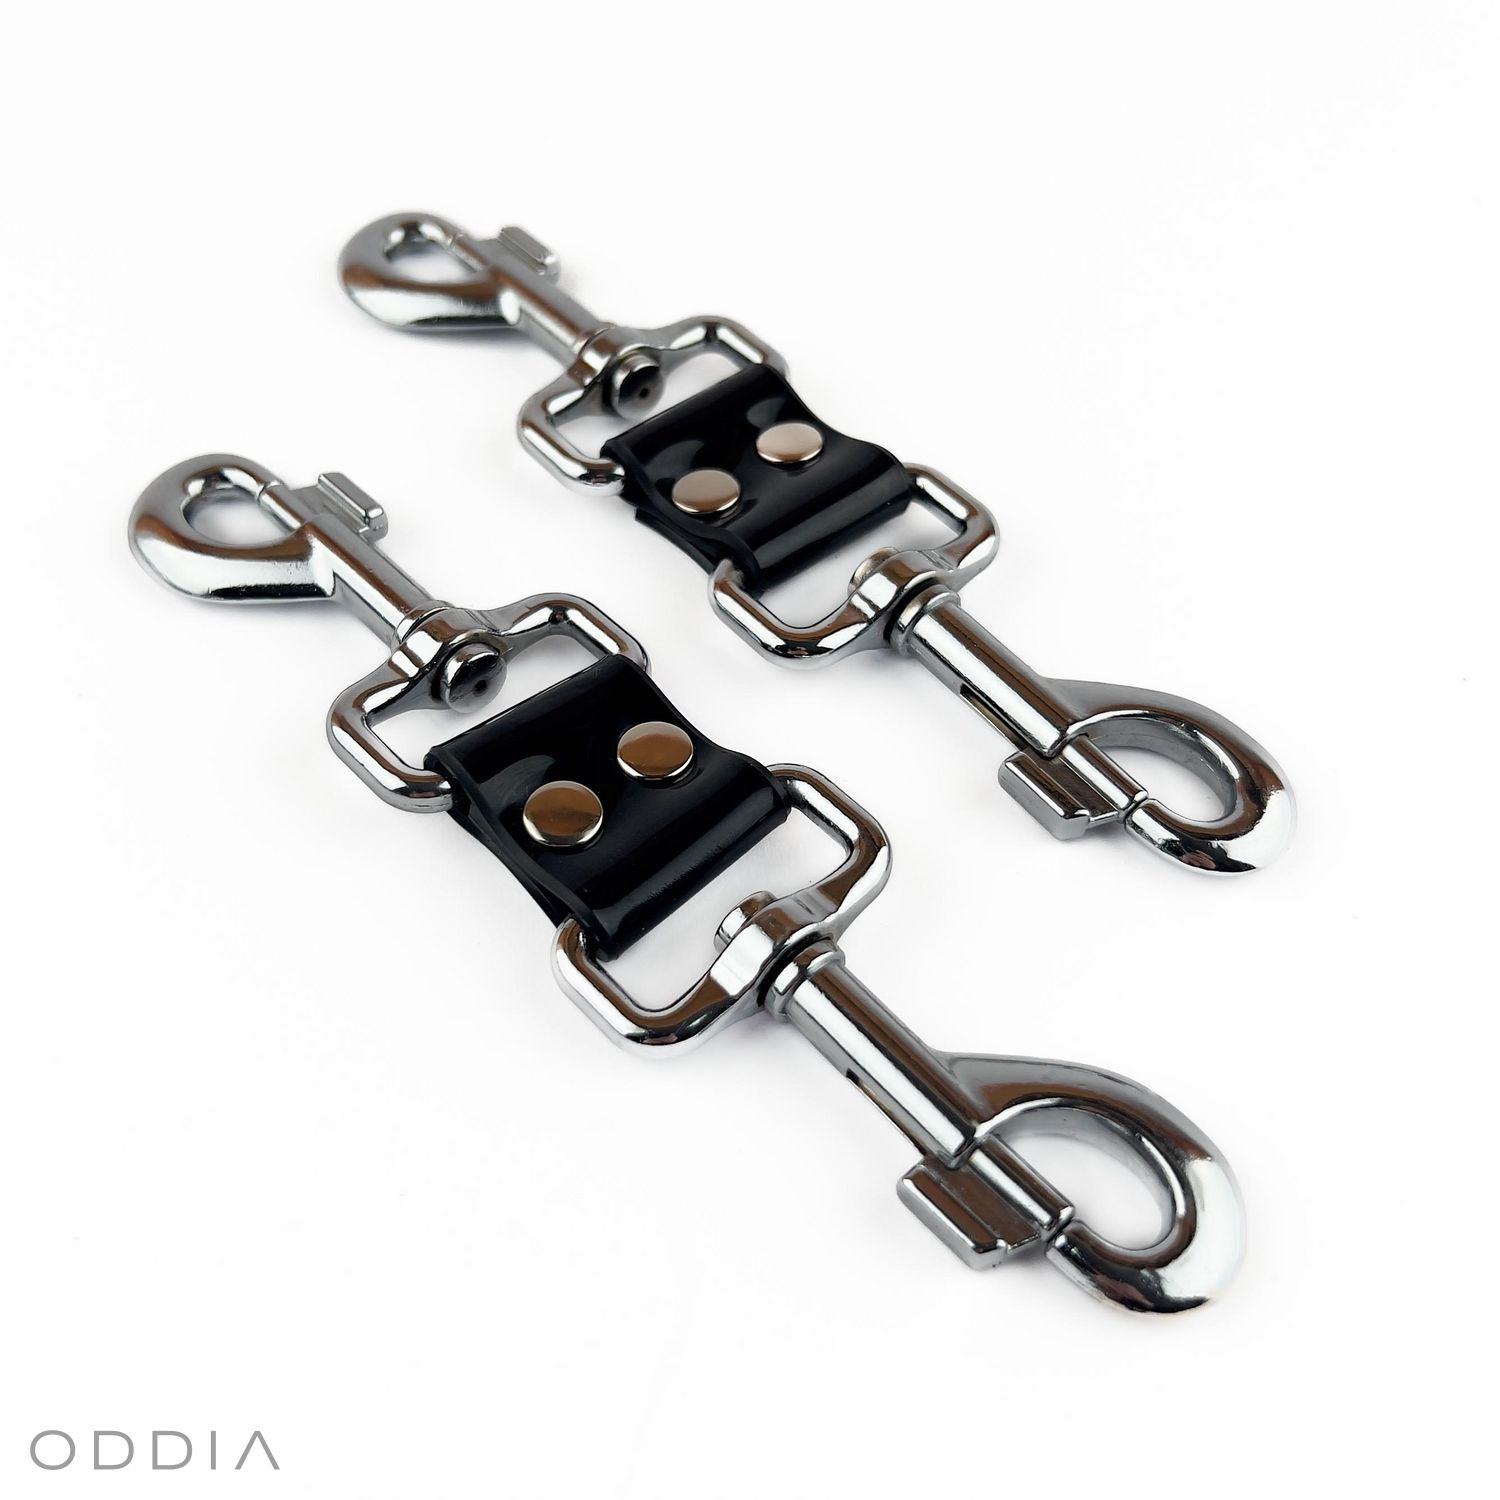 Black bondage connector for linking cuffs, ended with carabiners